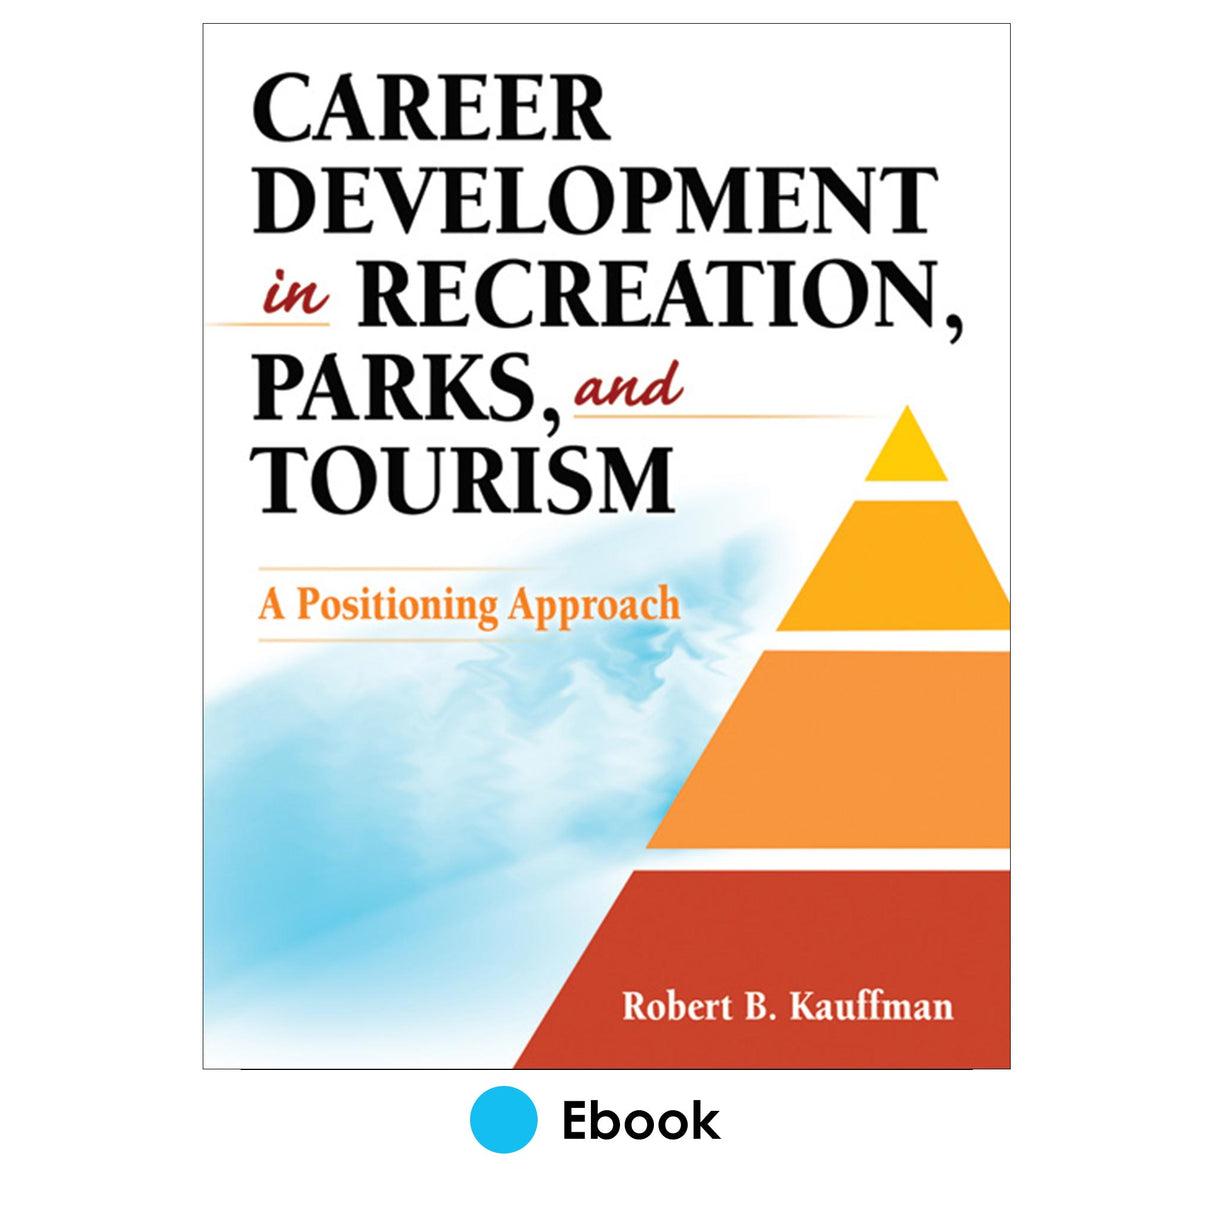 Career Development in Recreation, Parks, and Tourism PDF